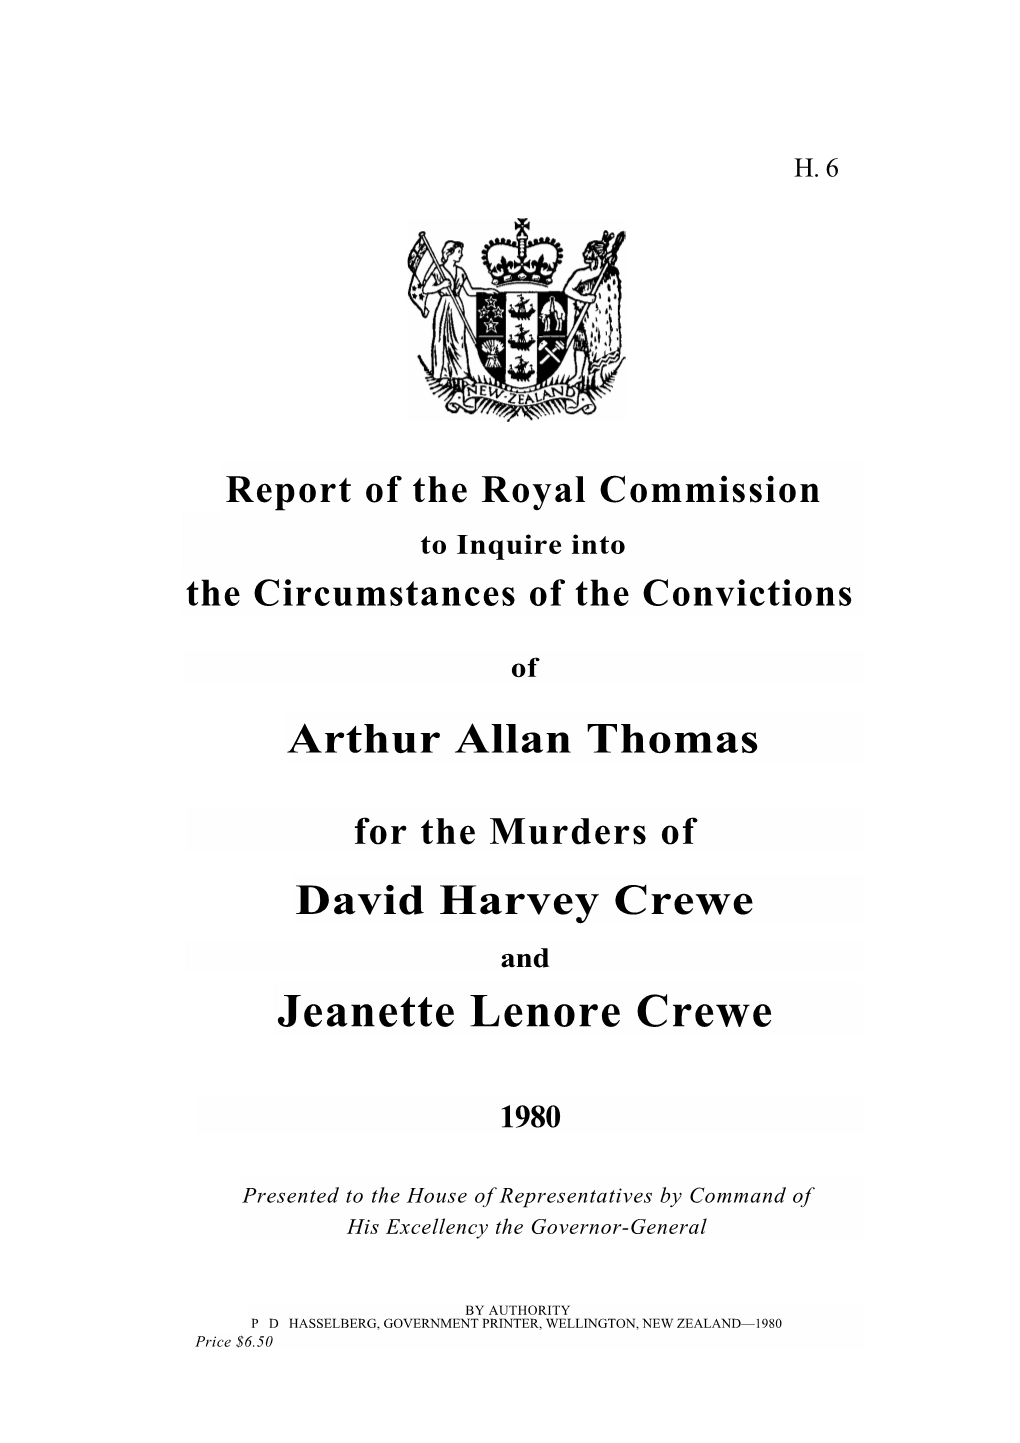 Arthur Allan Thomas for the Murders of David Harvey Crewe and Jeanette Lenore Crewe